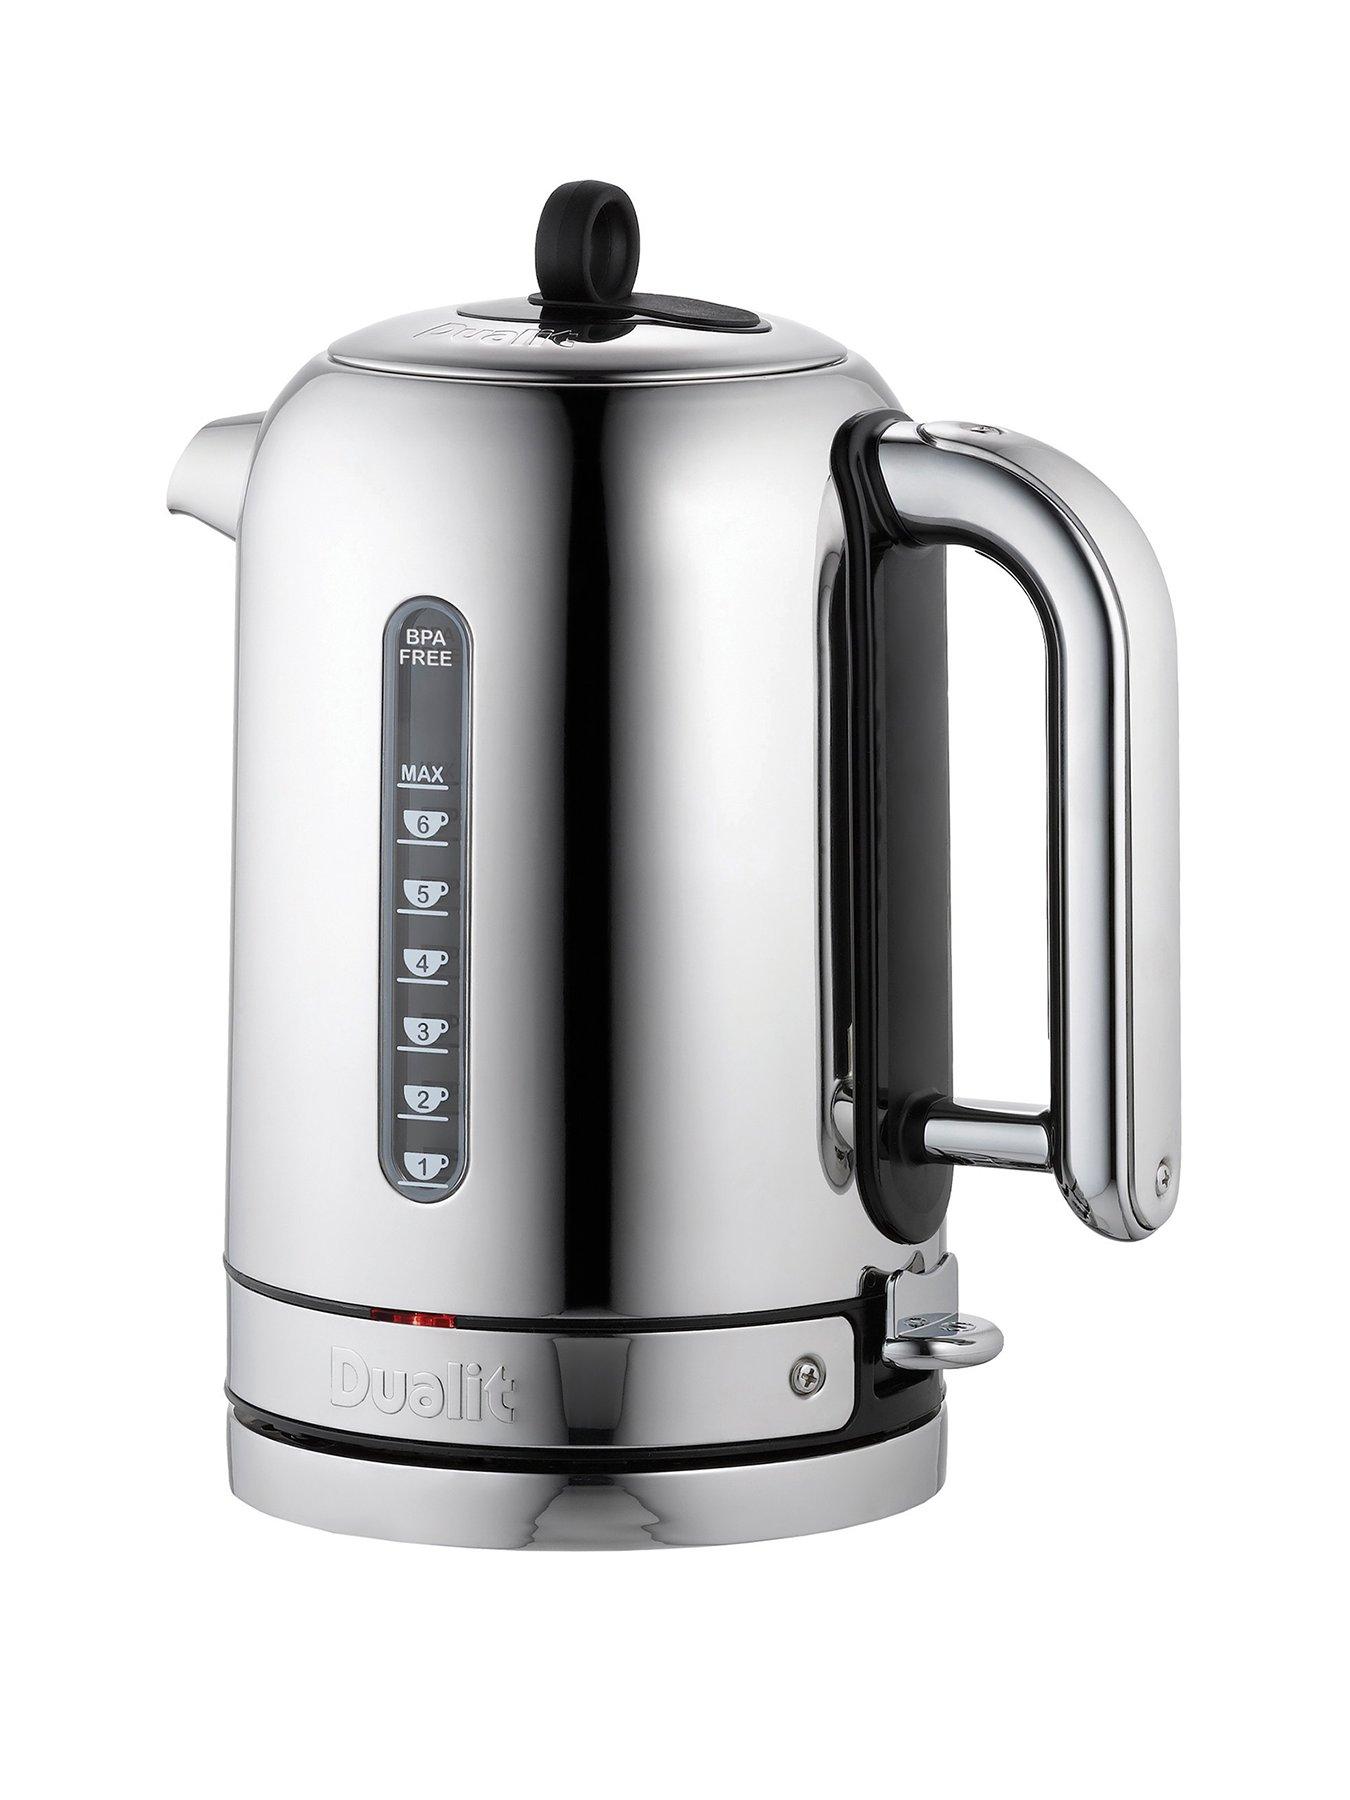 220V Retro Electric Kettle Fully Food Grade 304 Stainless Steel No